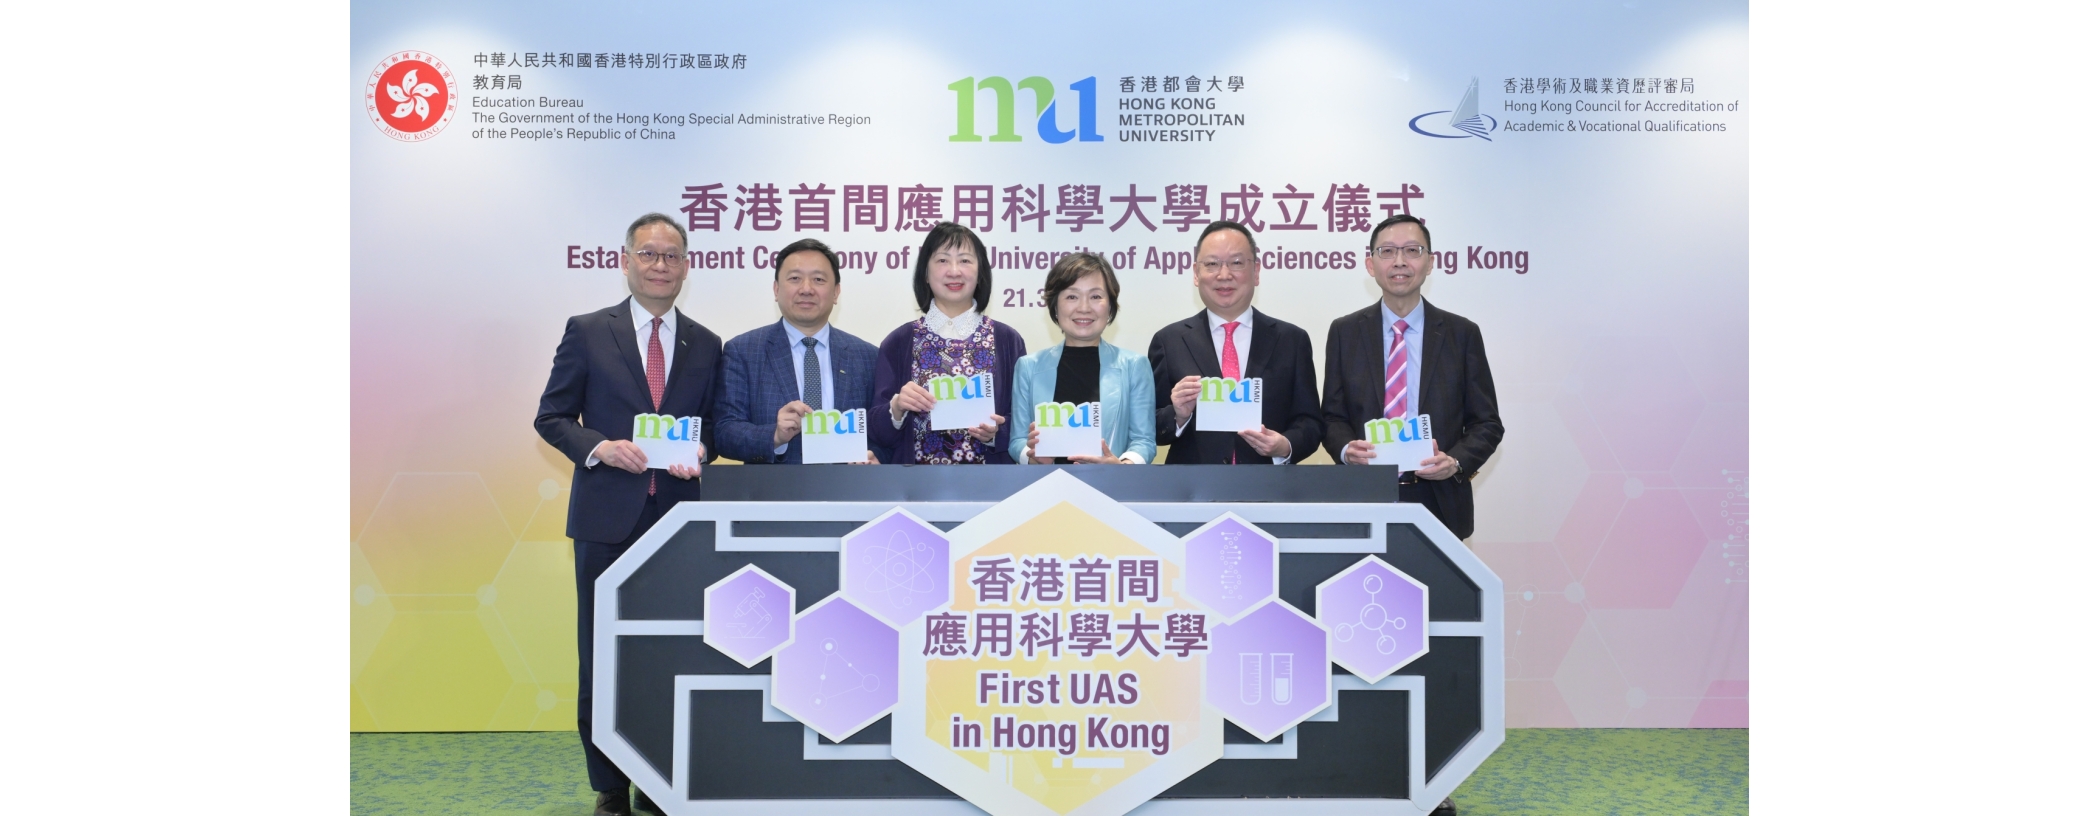 Establishment Ceremony of First University of Applied Sciences in Hong Kong